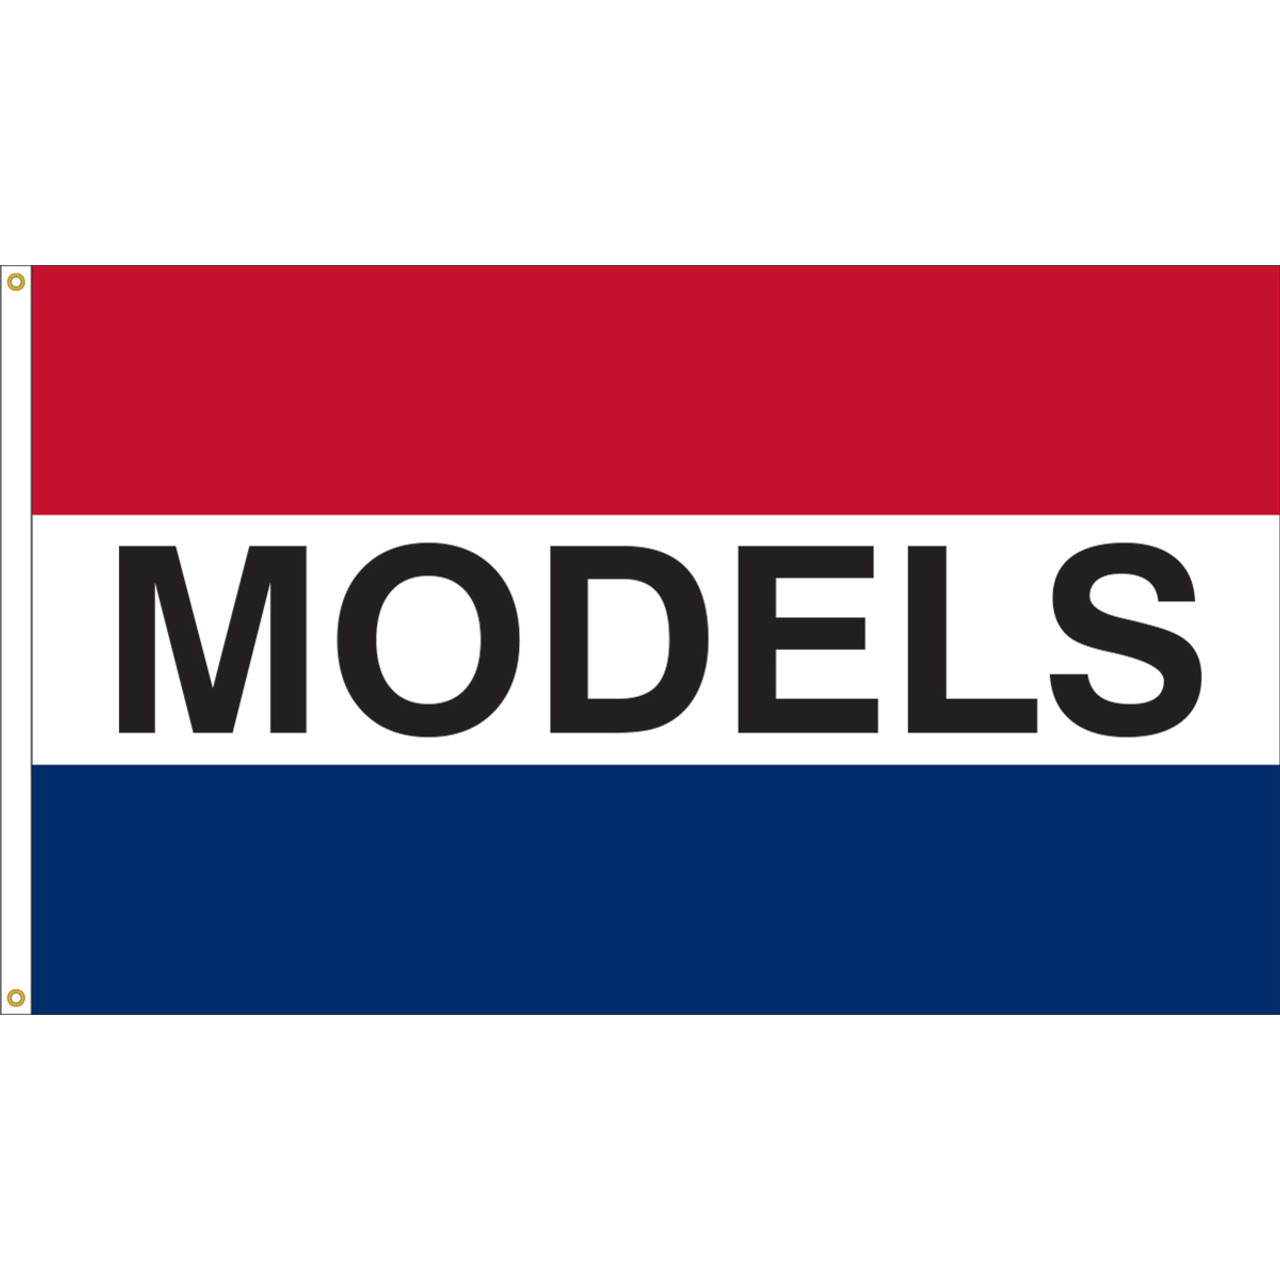 3' x 5' Message Flag "MODELS" Red/White/Blue Nylon with Header and Grommets, 120042